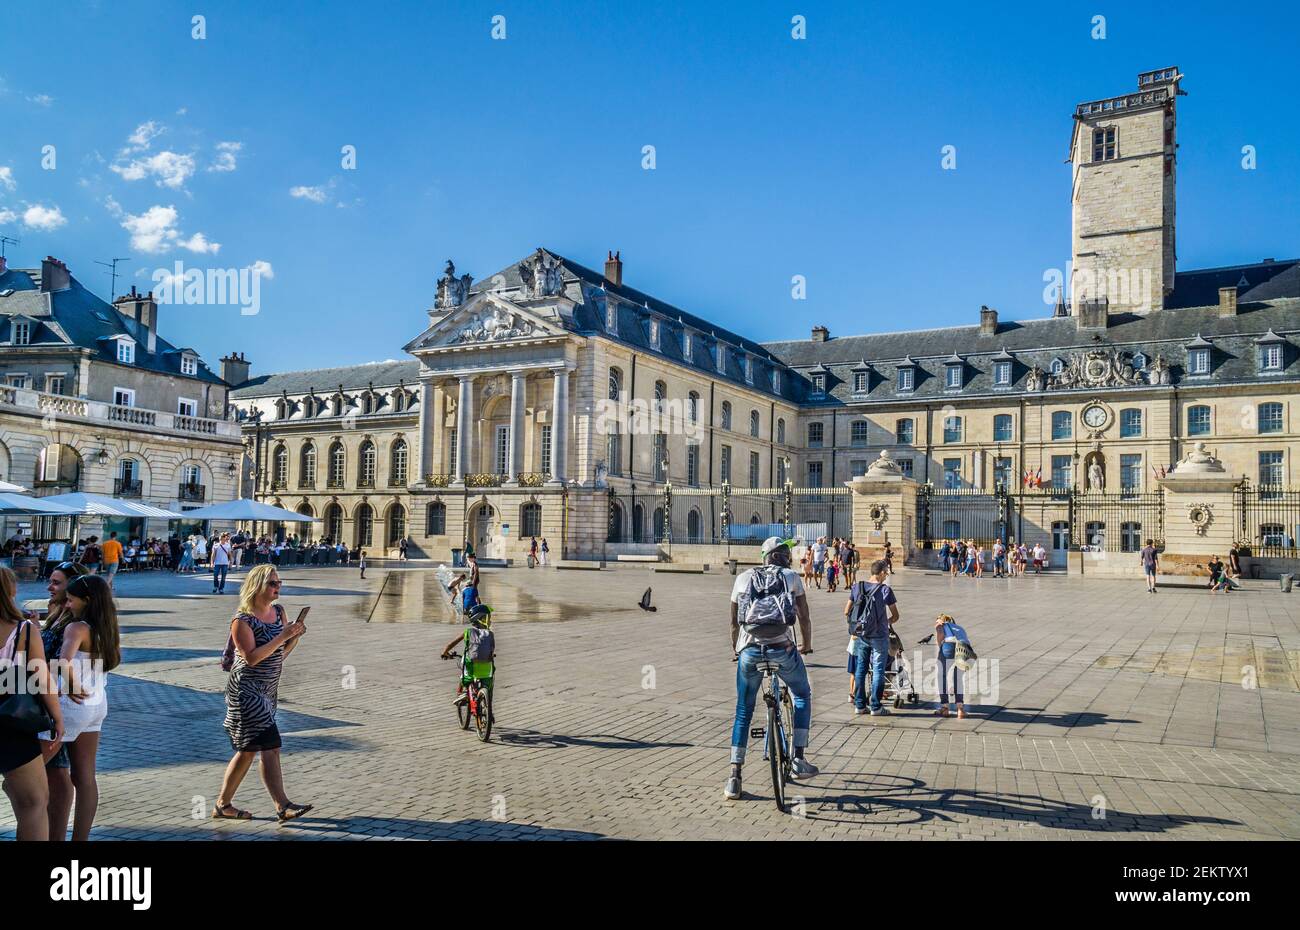 east portal of the Palace of the Dukes and Estates of Burgundy at Place de la Libération in Dijon, Burgundy, with Tour Philippe le Bon towerin the bac Stock Photo